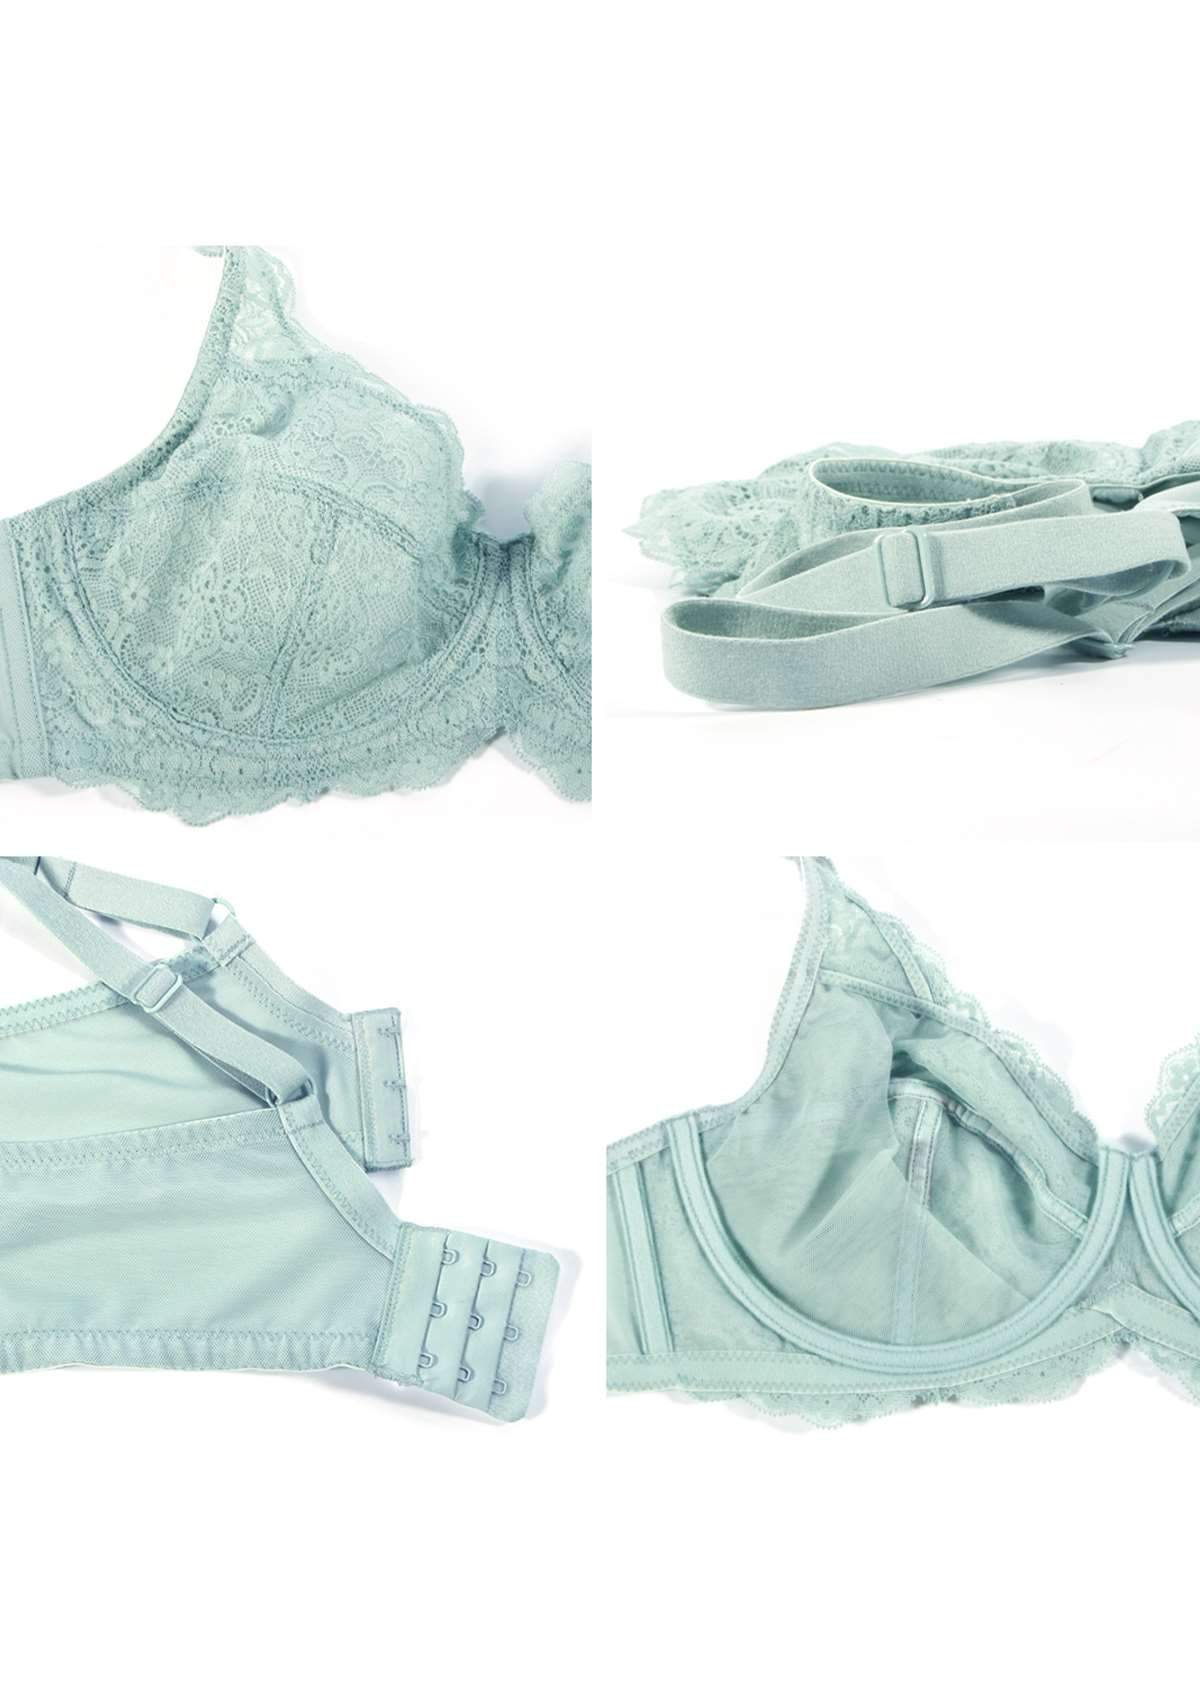 HSIA All-Over Floral Lace: Best Bra For Elderly With Sagging Breasts - Crystal Blue / 34 / DDD/F